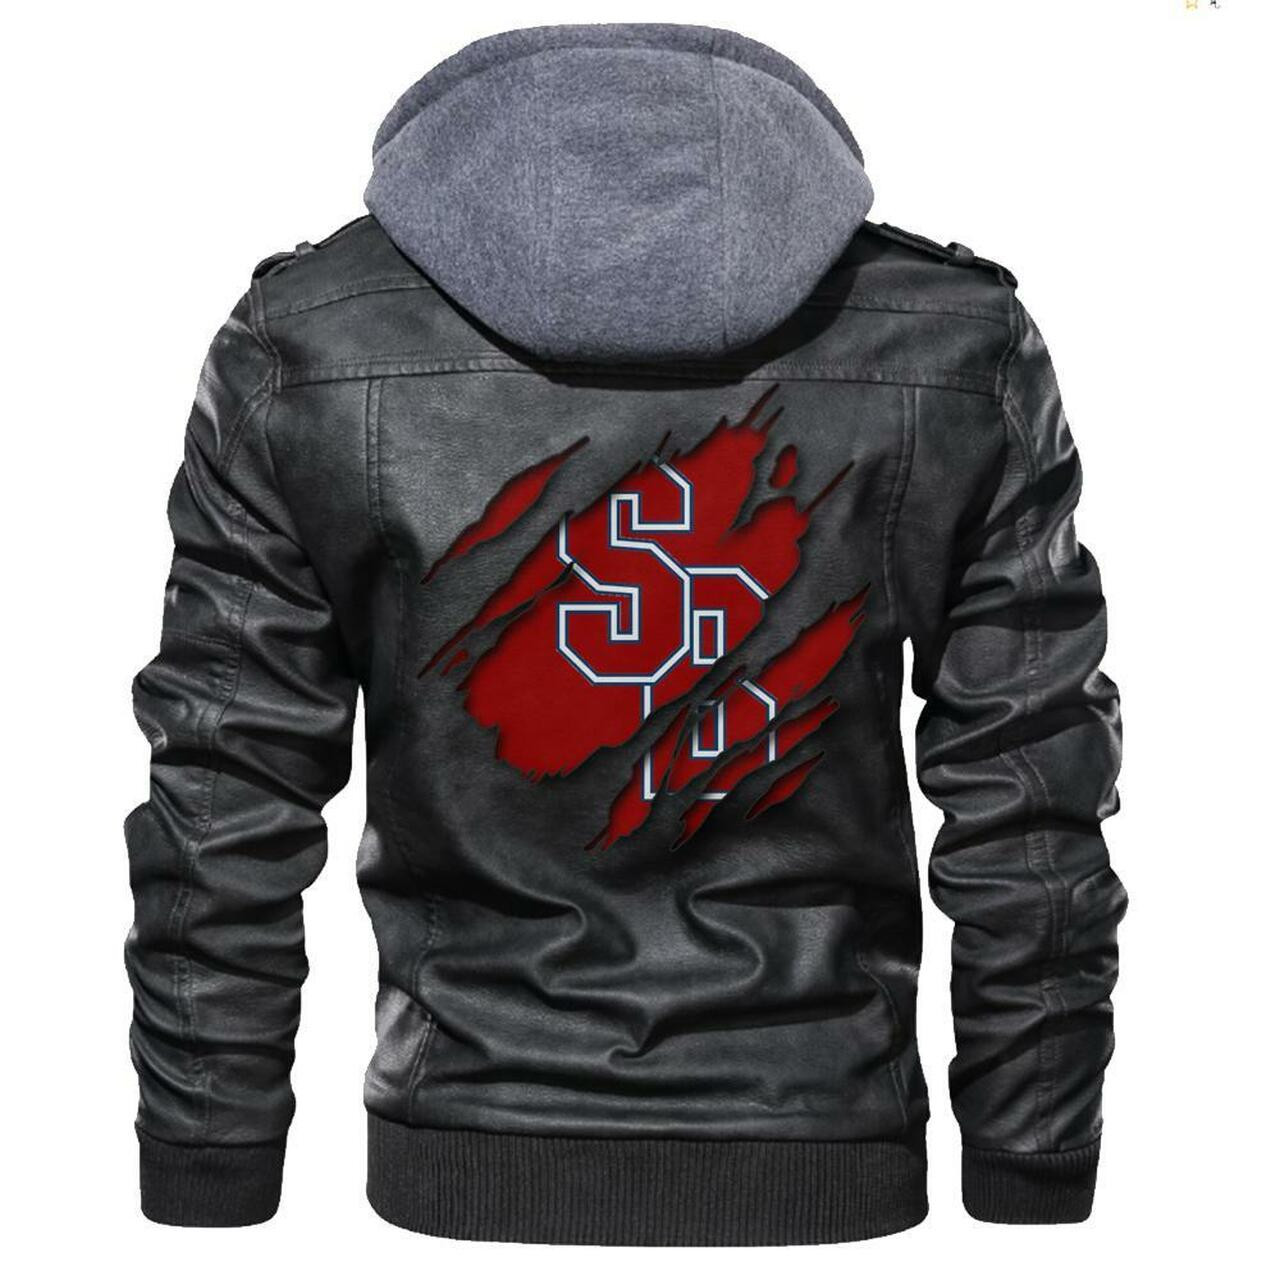 Check out and find the right leather jacket below 60